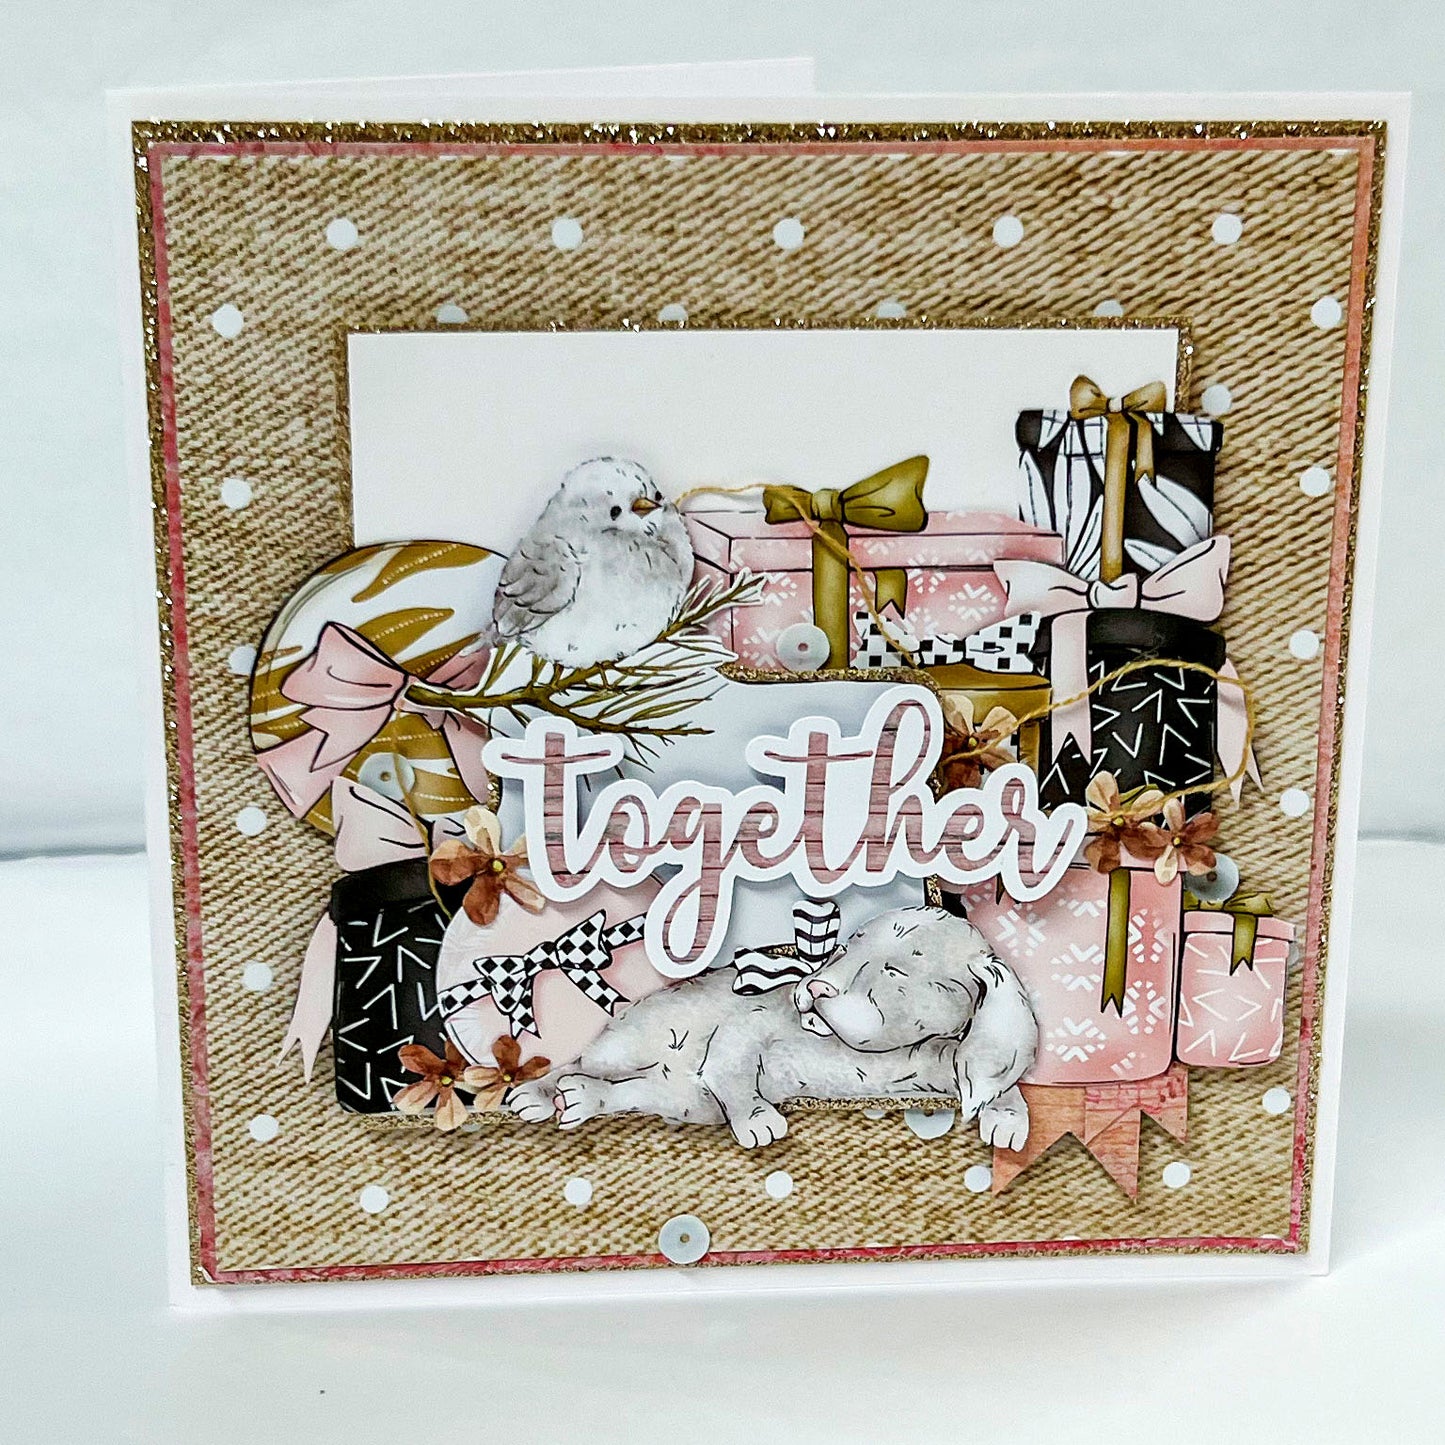 Peace & Joy 12x12 Double-Sided Patterned Paper Pack - Designed by Alicia Redshaw Exclusively for Scrapbook Fantasies